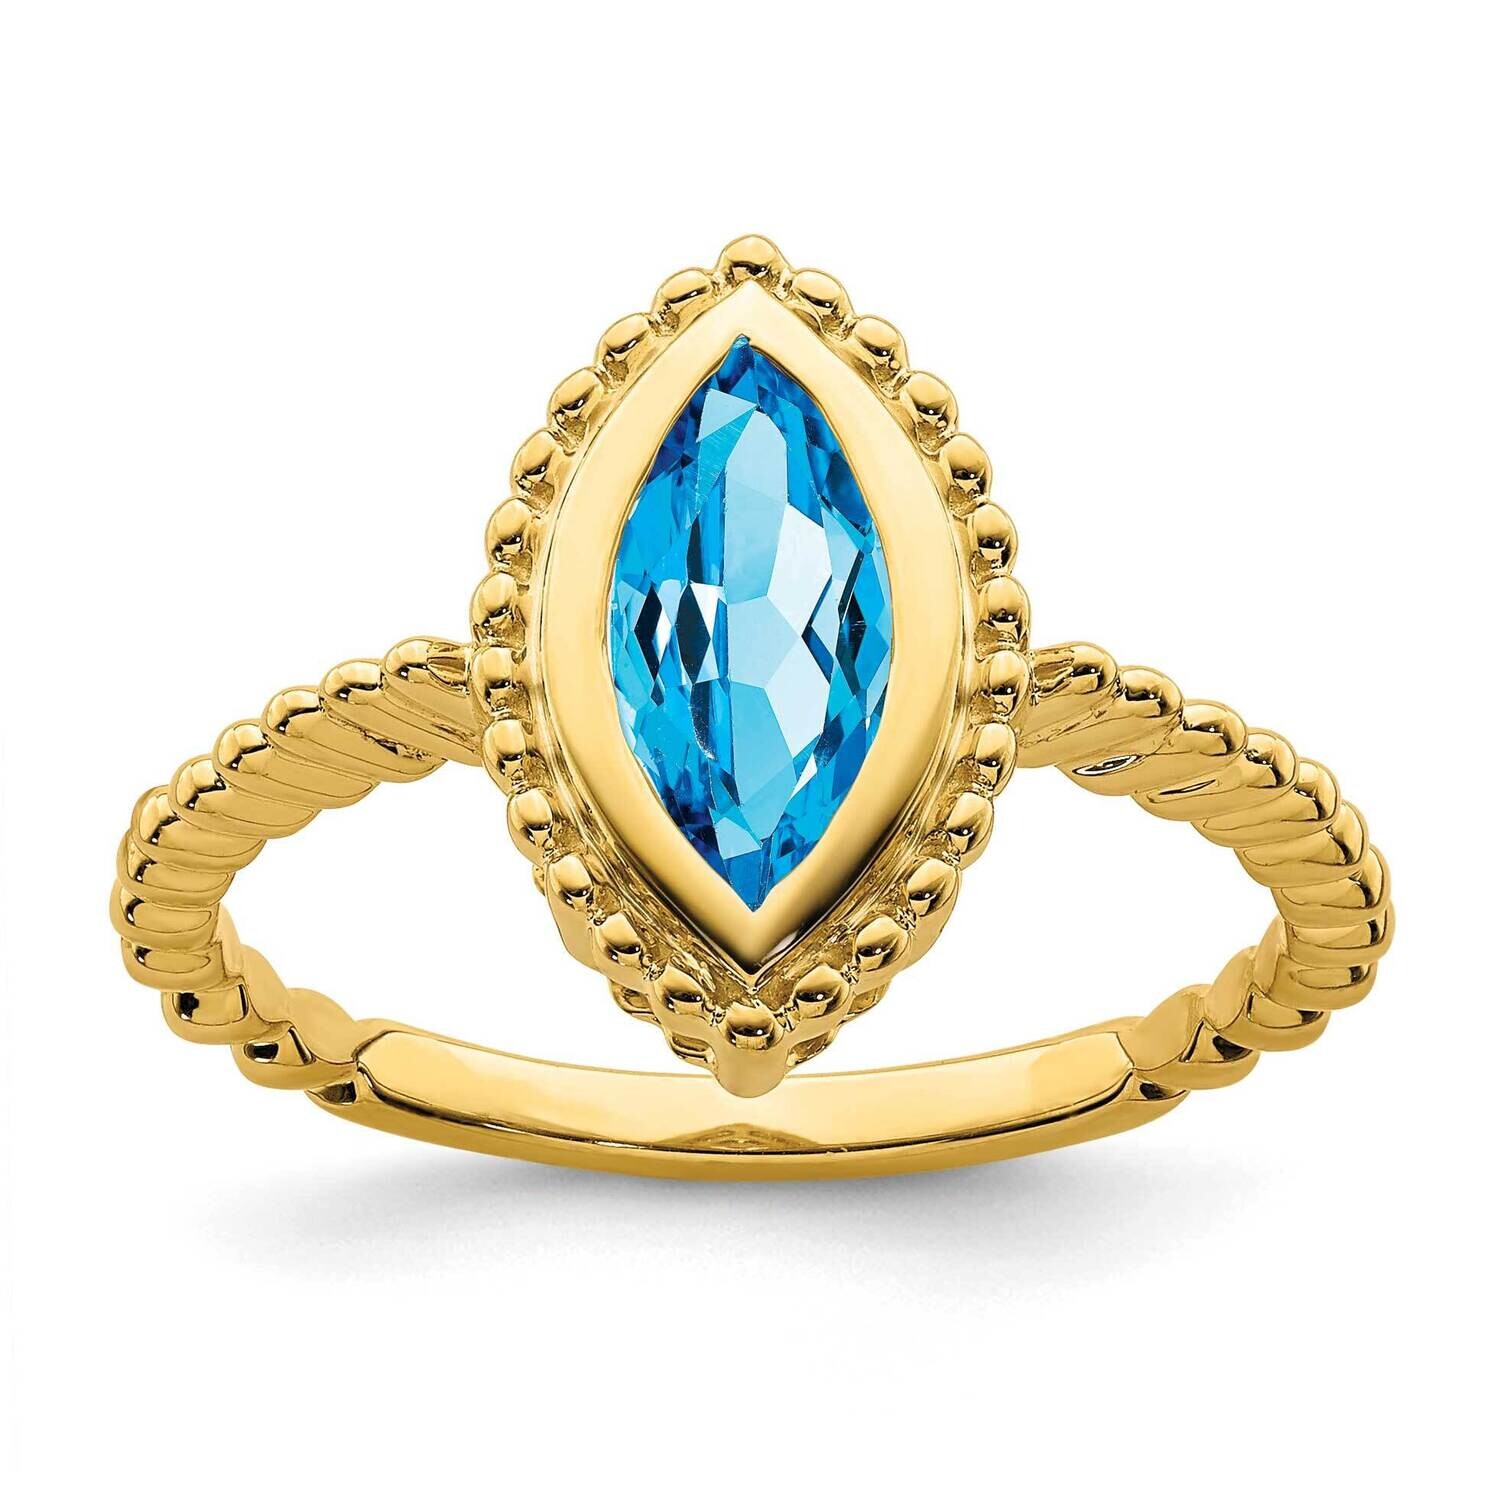 Marquise Blue Topaz Ring 14k Gold RM7204-BT-Y